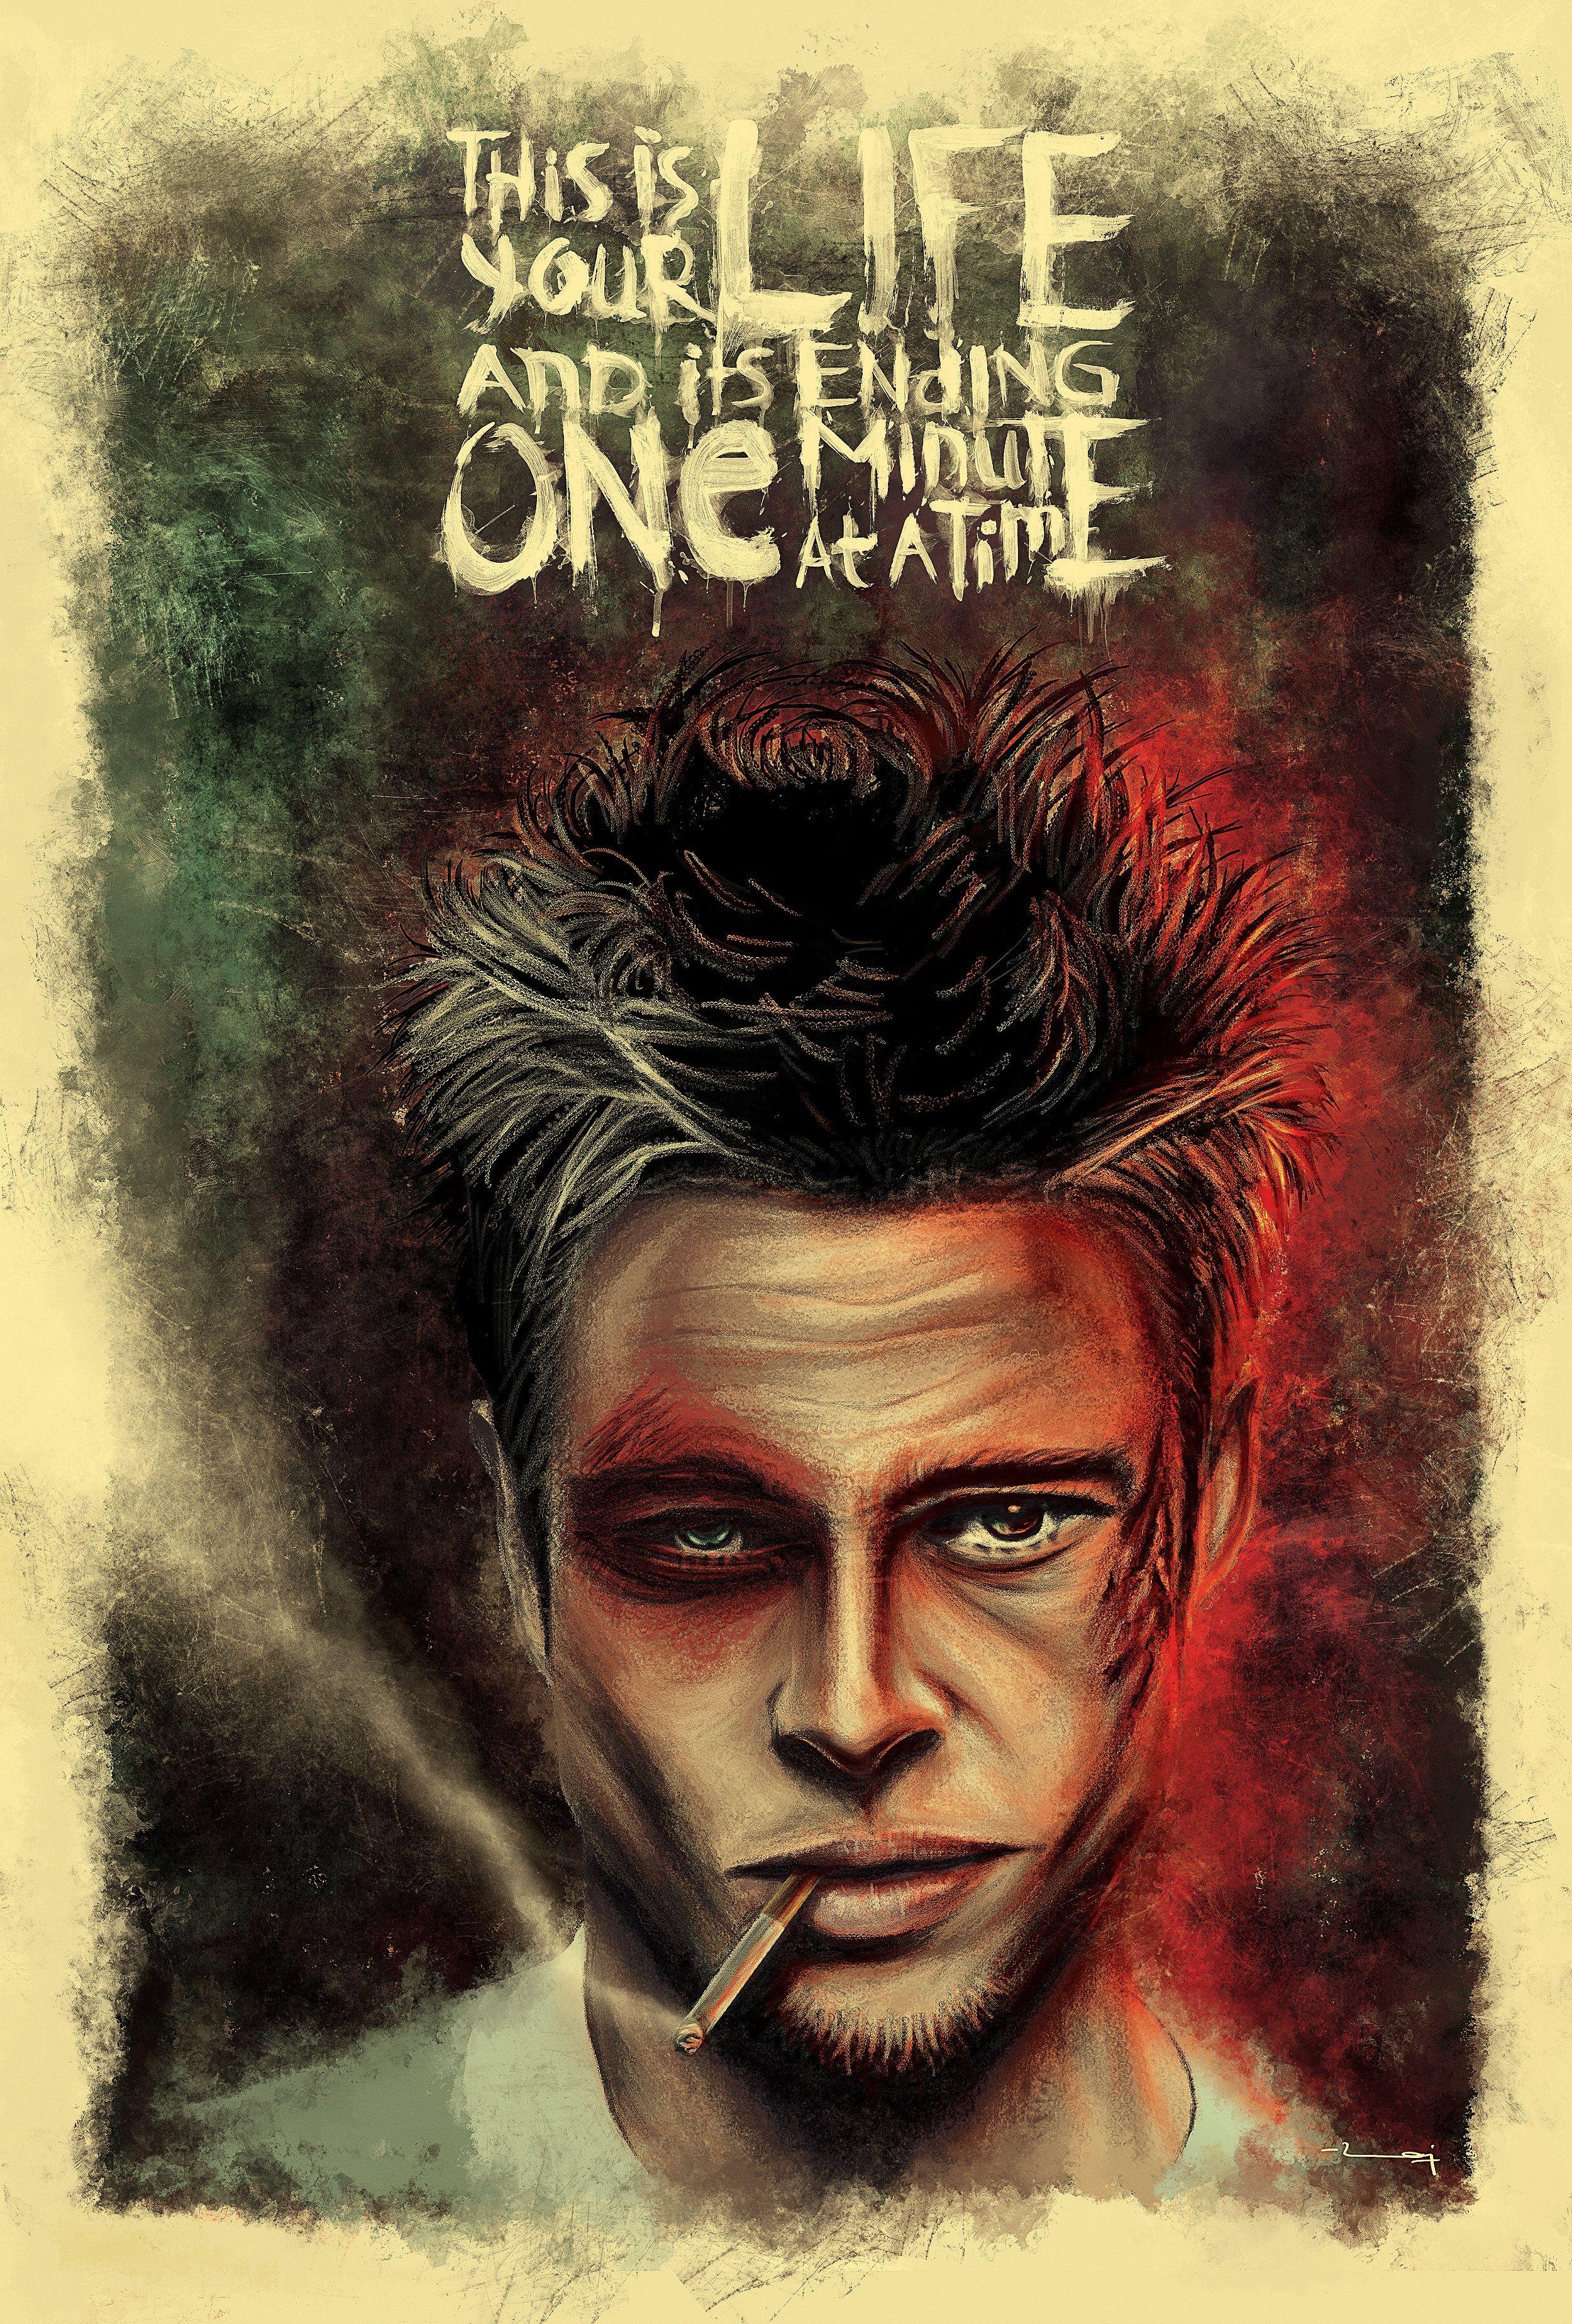 Gallery For > Fight Club Wallpaper